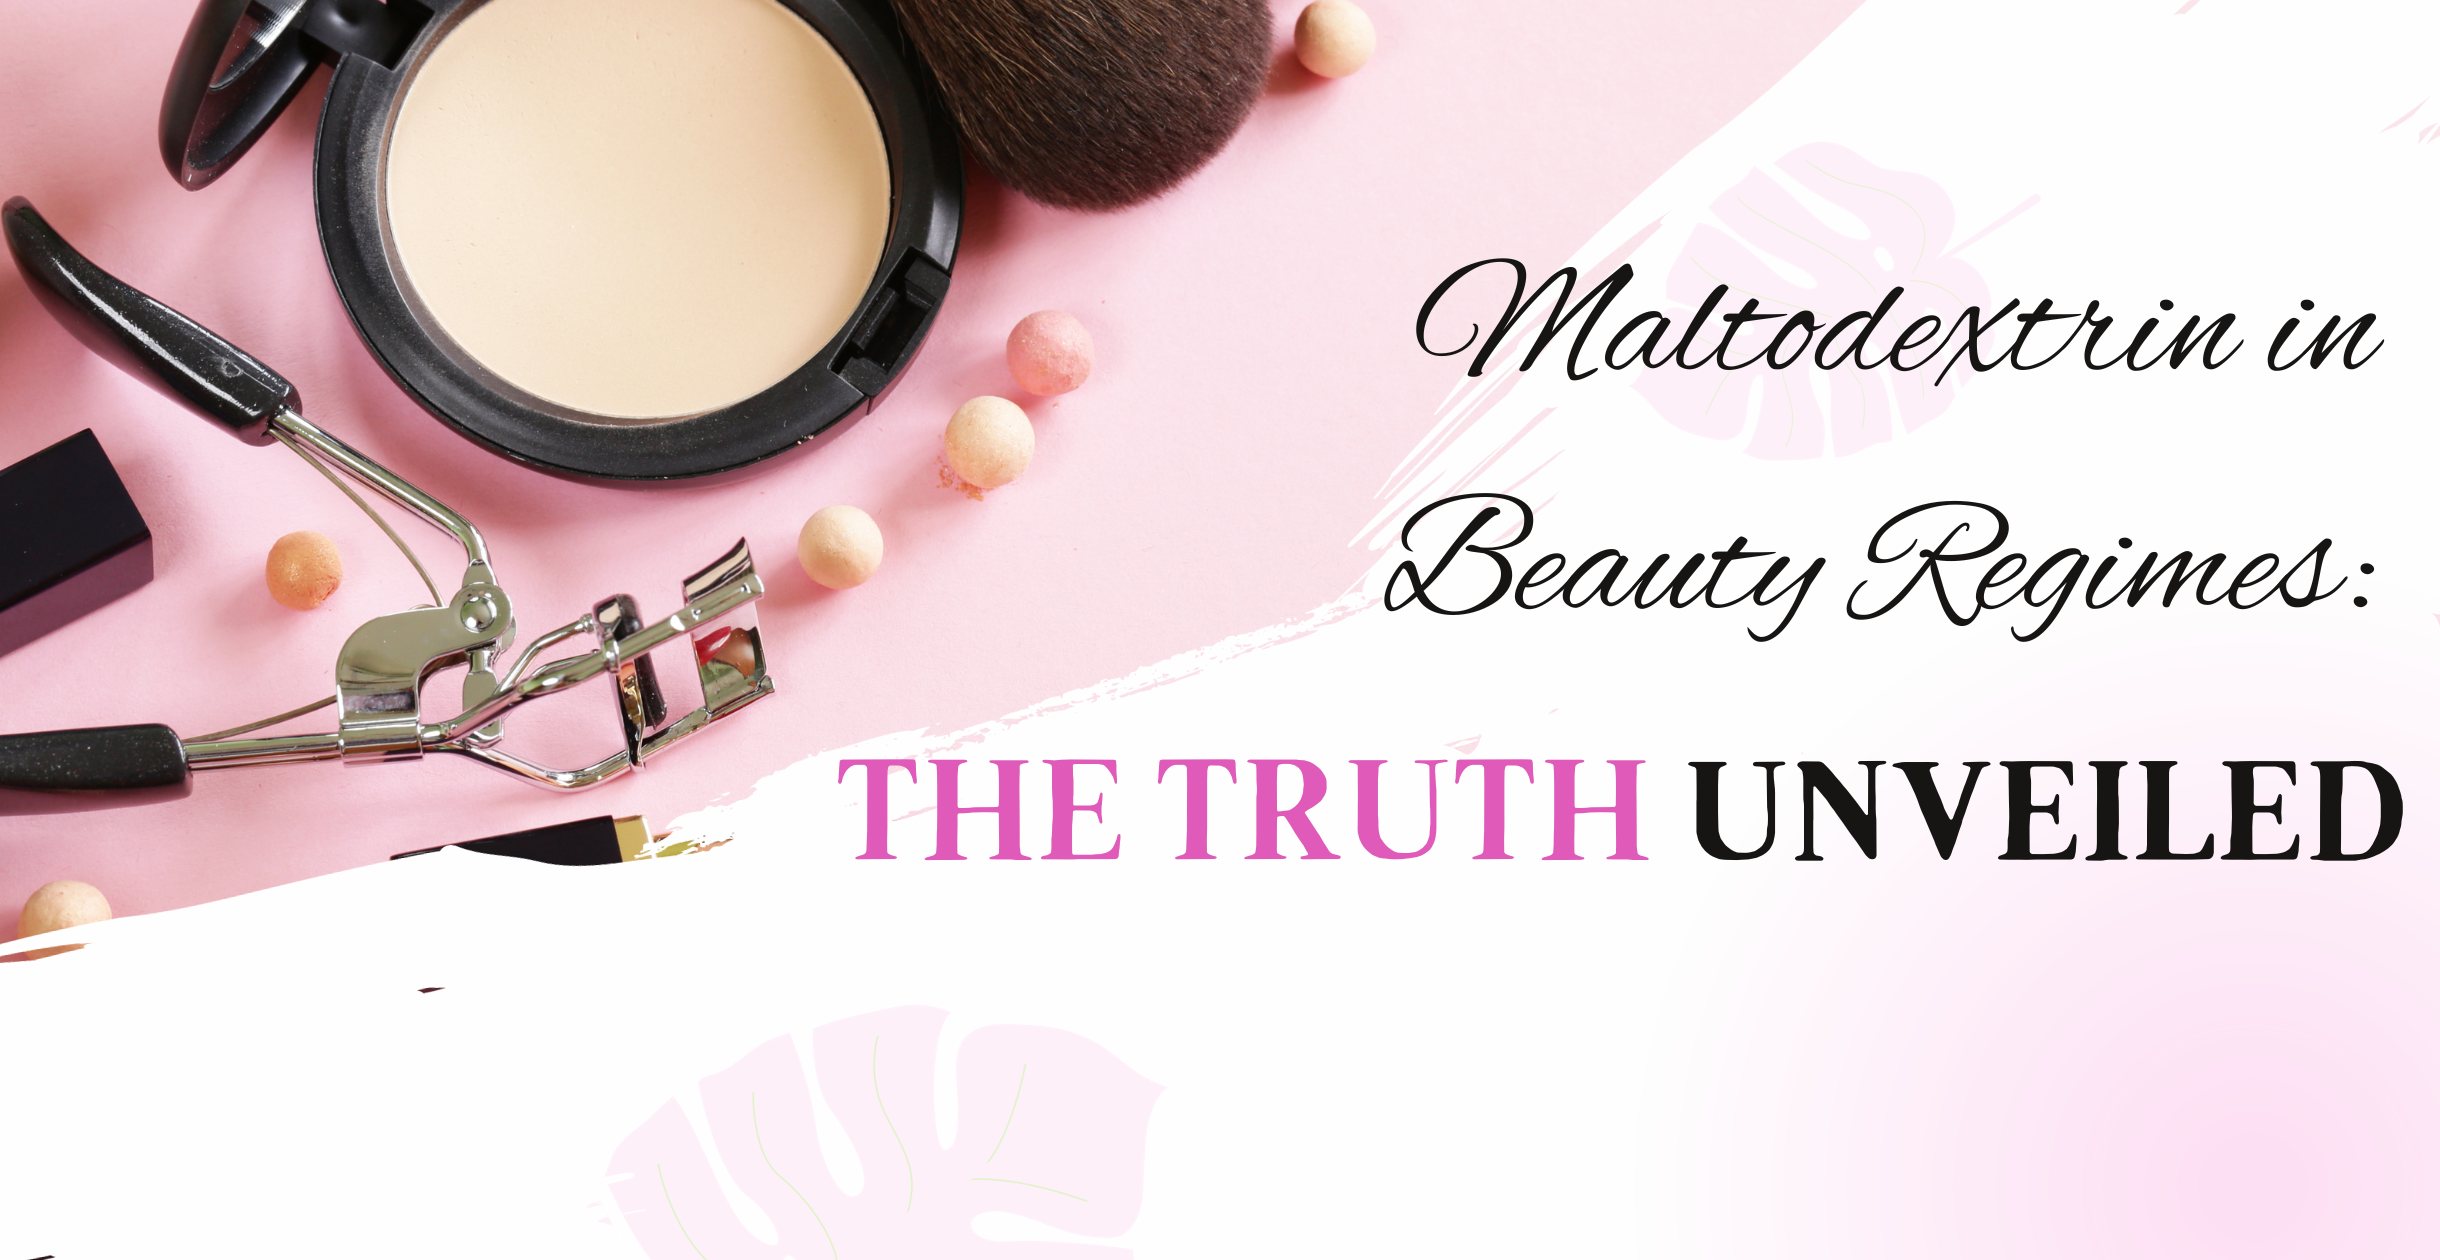 Maltodextrin in Beauty Regimes: The Truth Unveiled